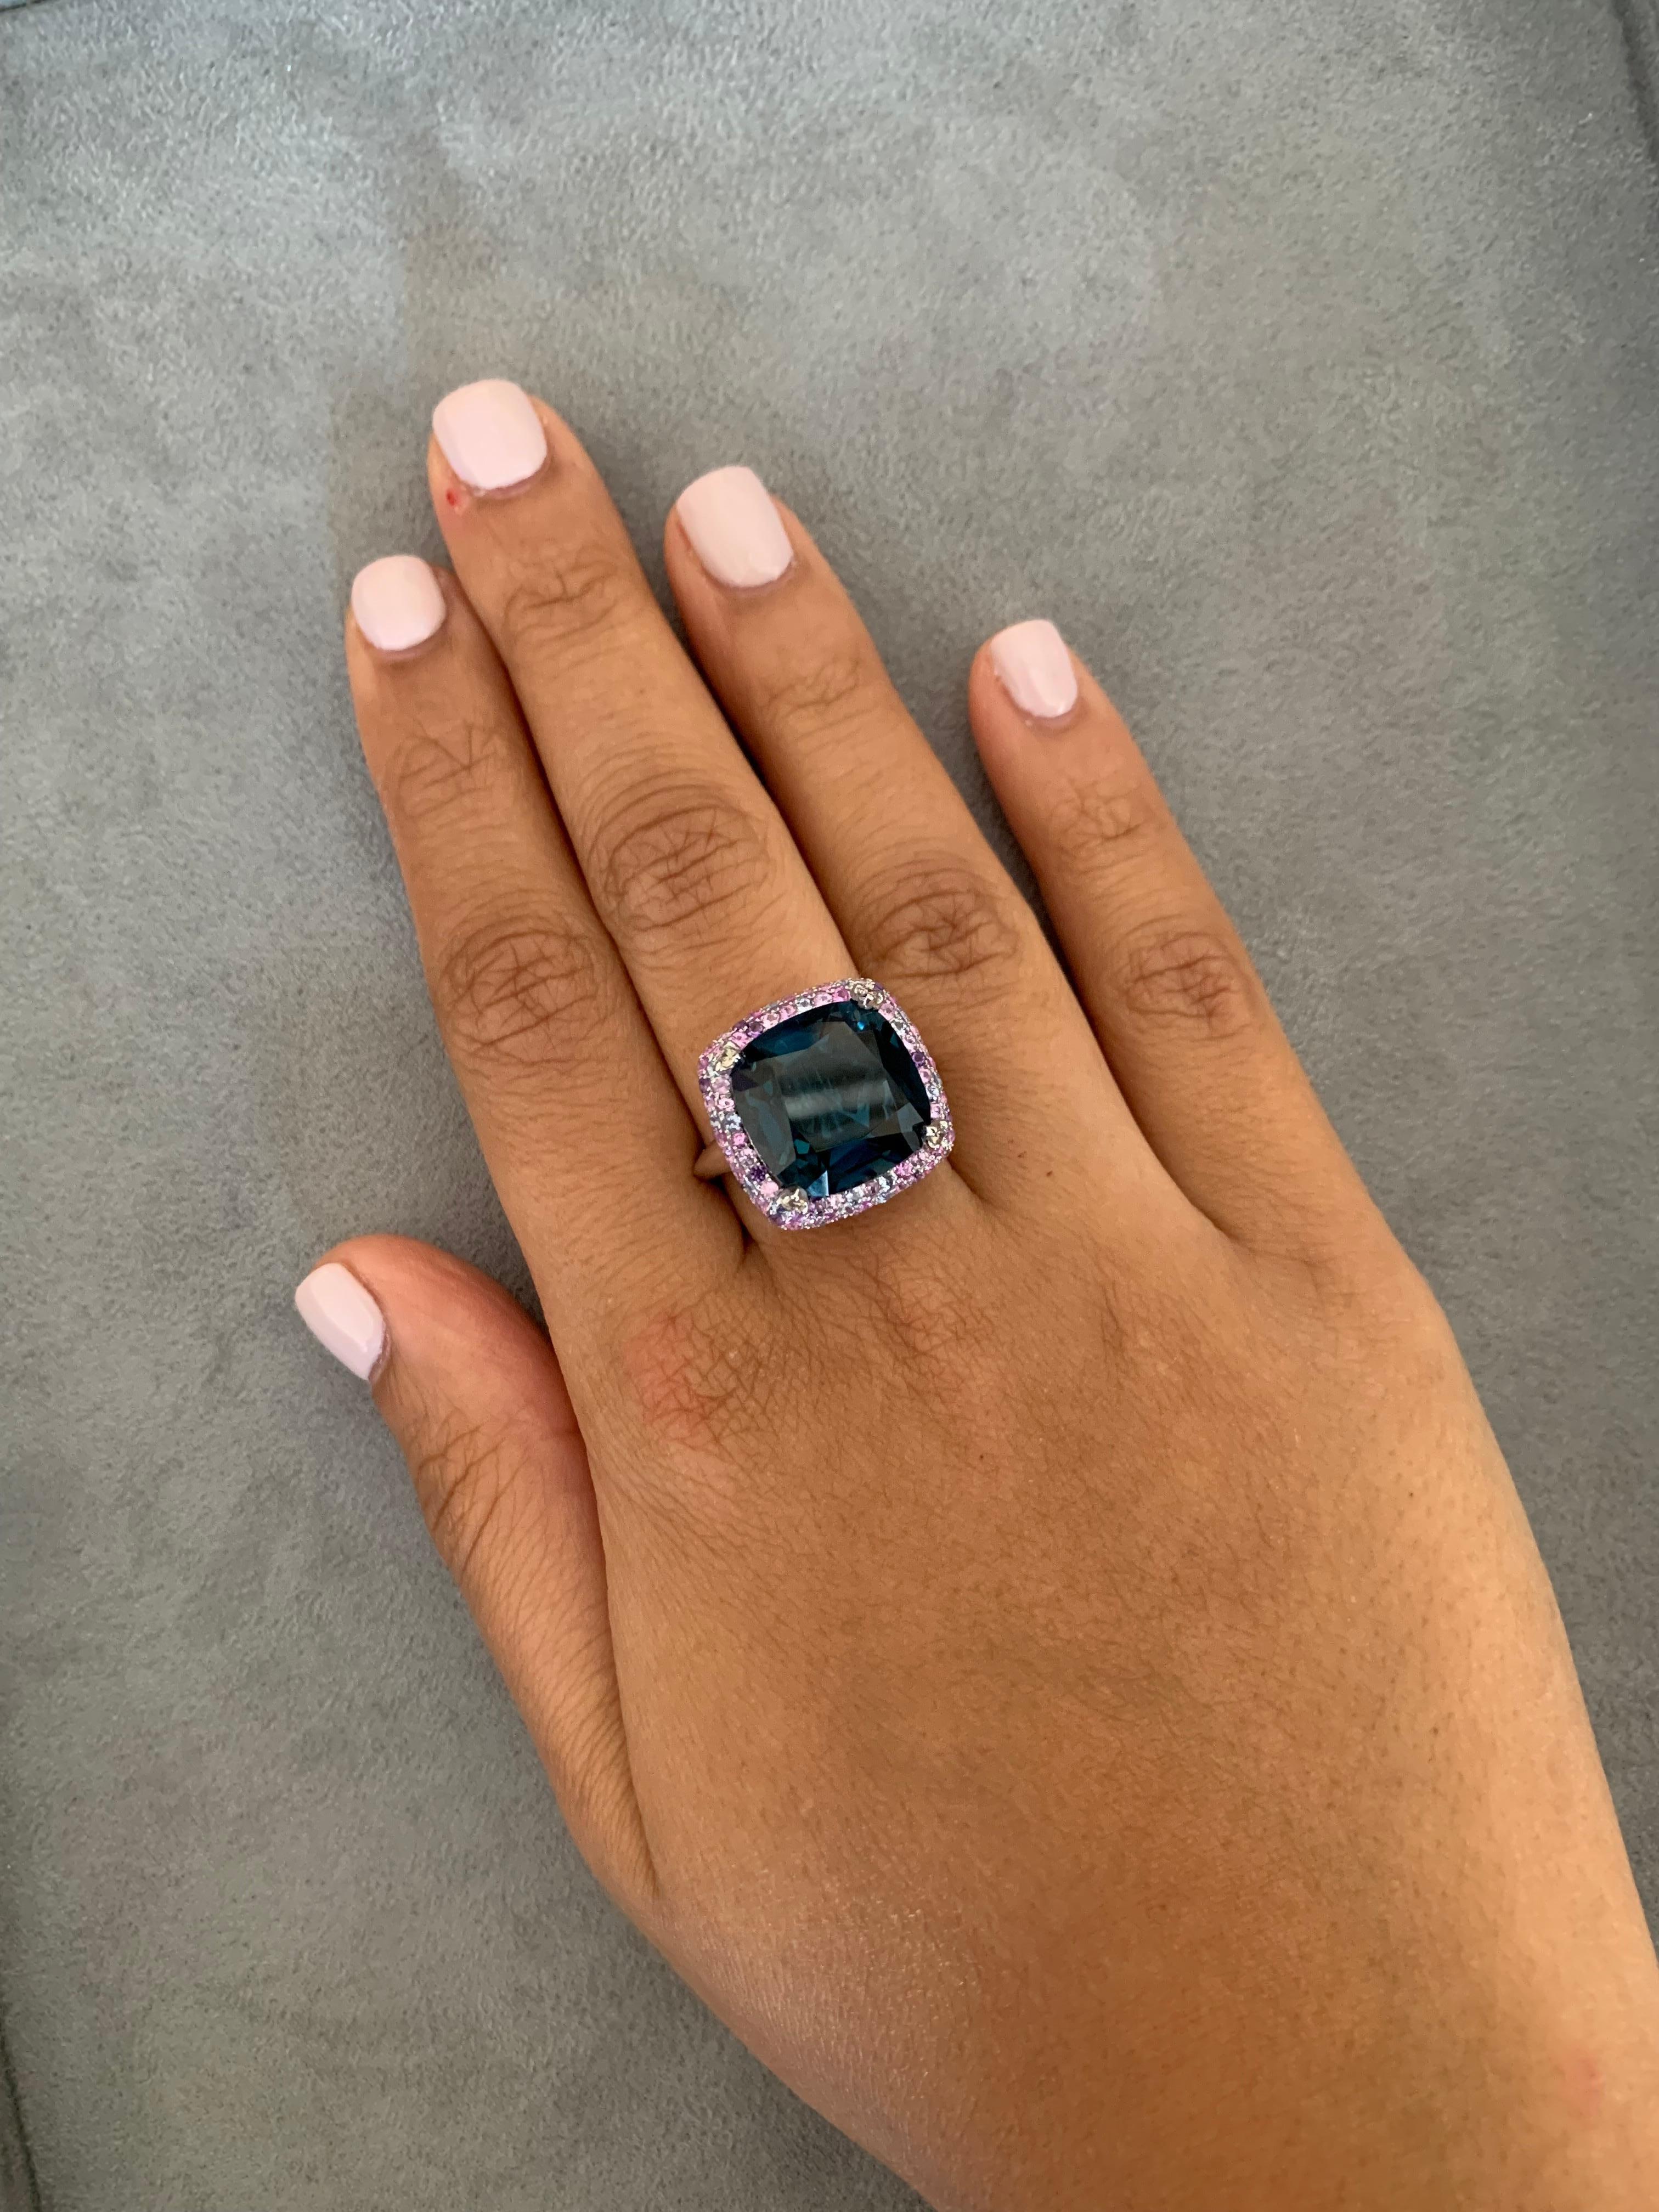 Bold Blue Topaz! Light and easy to wear this ring showcase deep blue topaz accented with a multi color gemstone and diamond frame. These pieces are dainty yet have a great pop of color from the vibrant gems.

Blue Topaz Candy Ring with Gemstone &